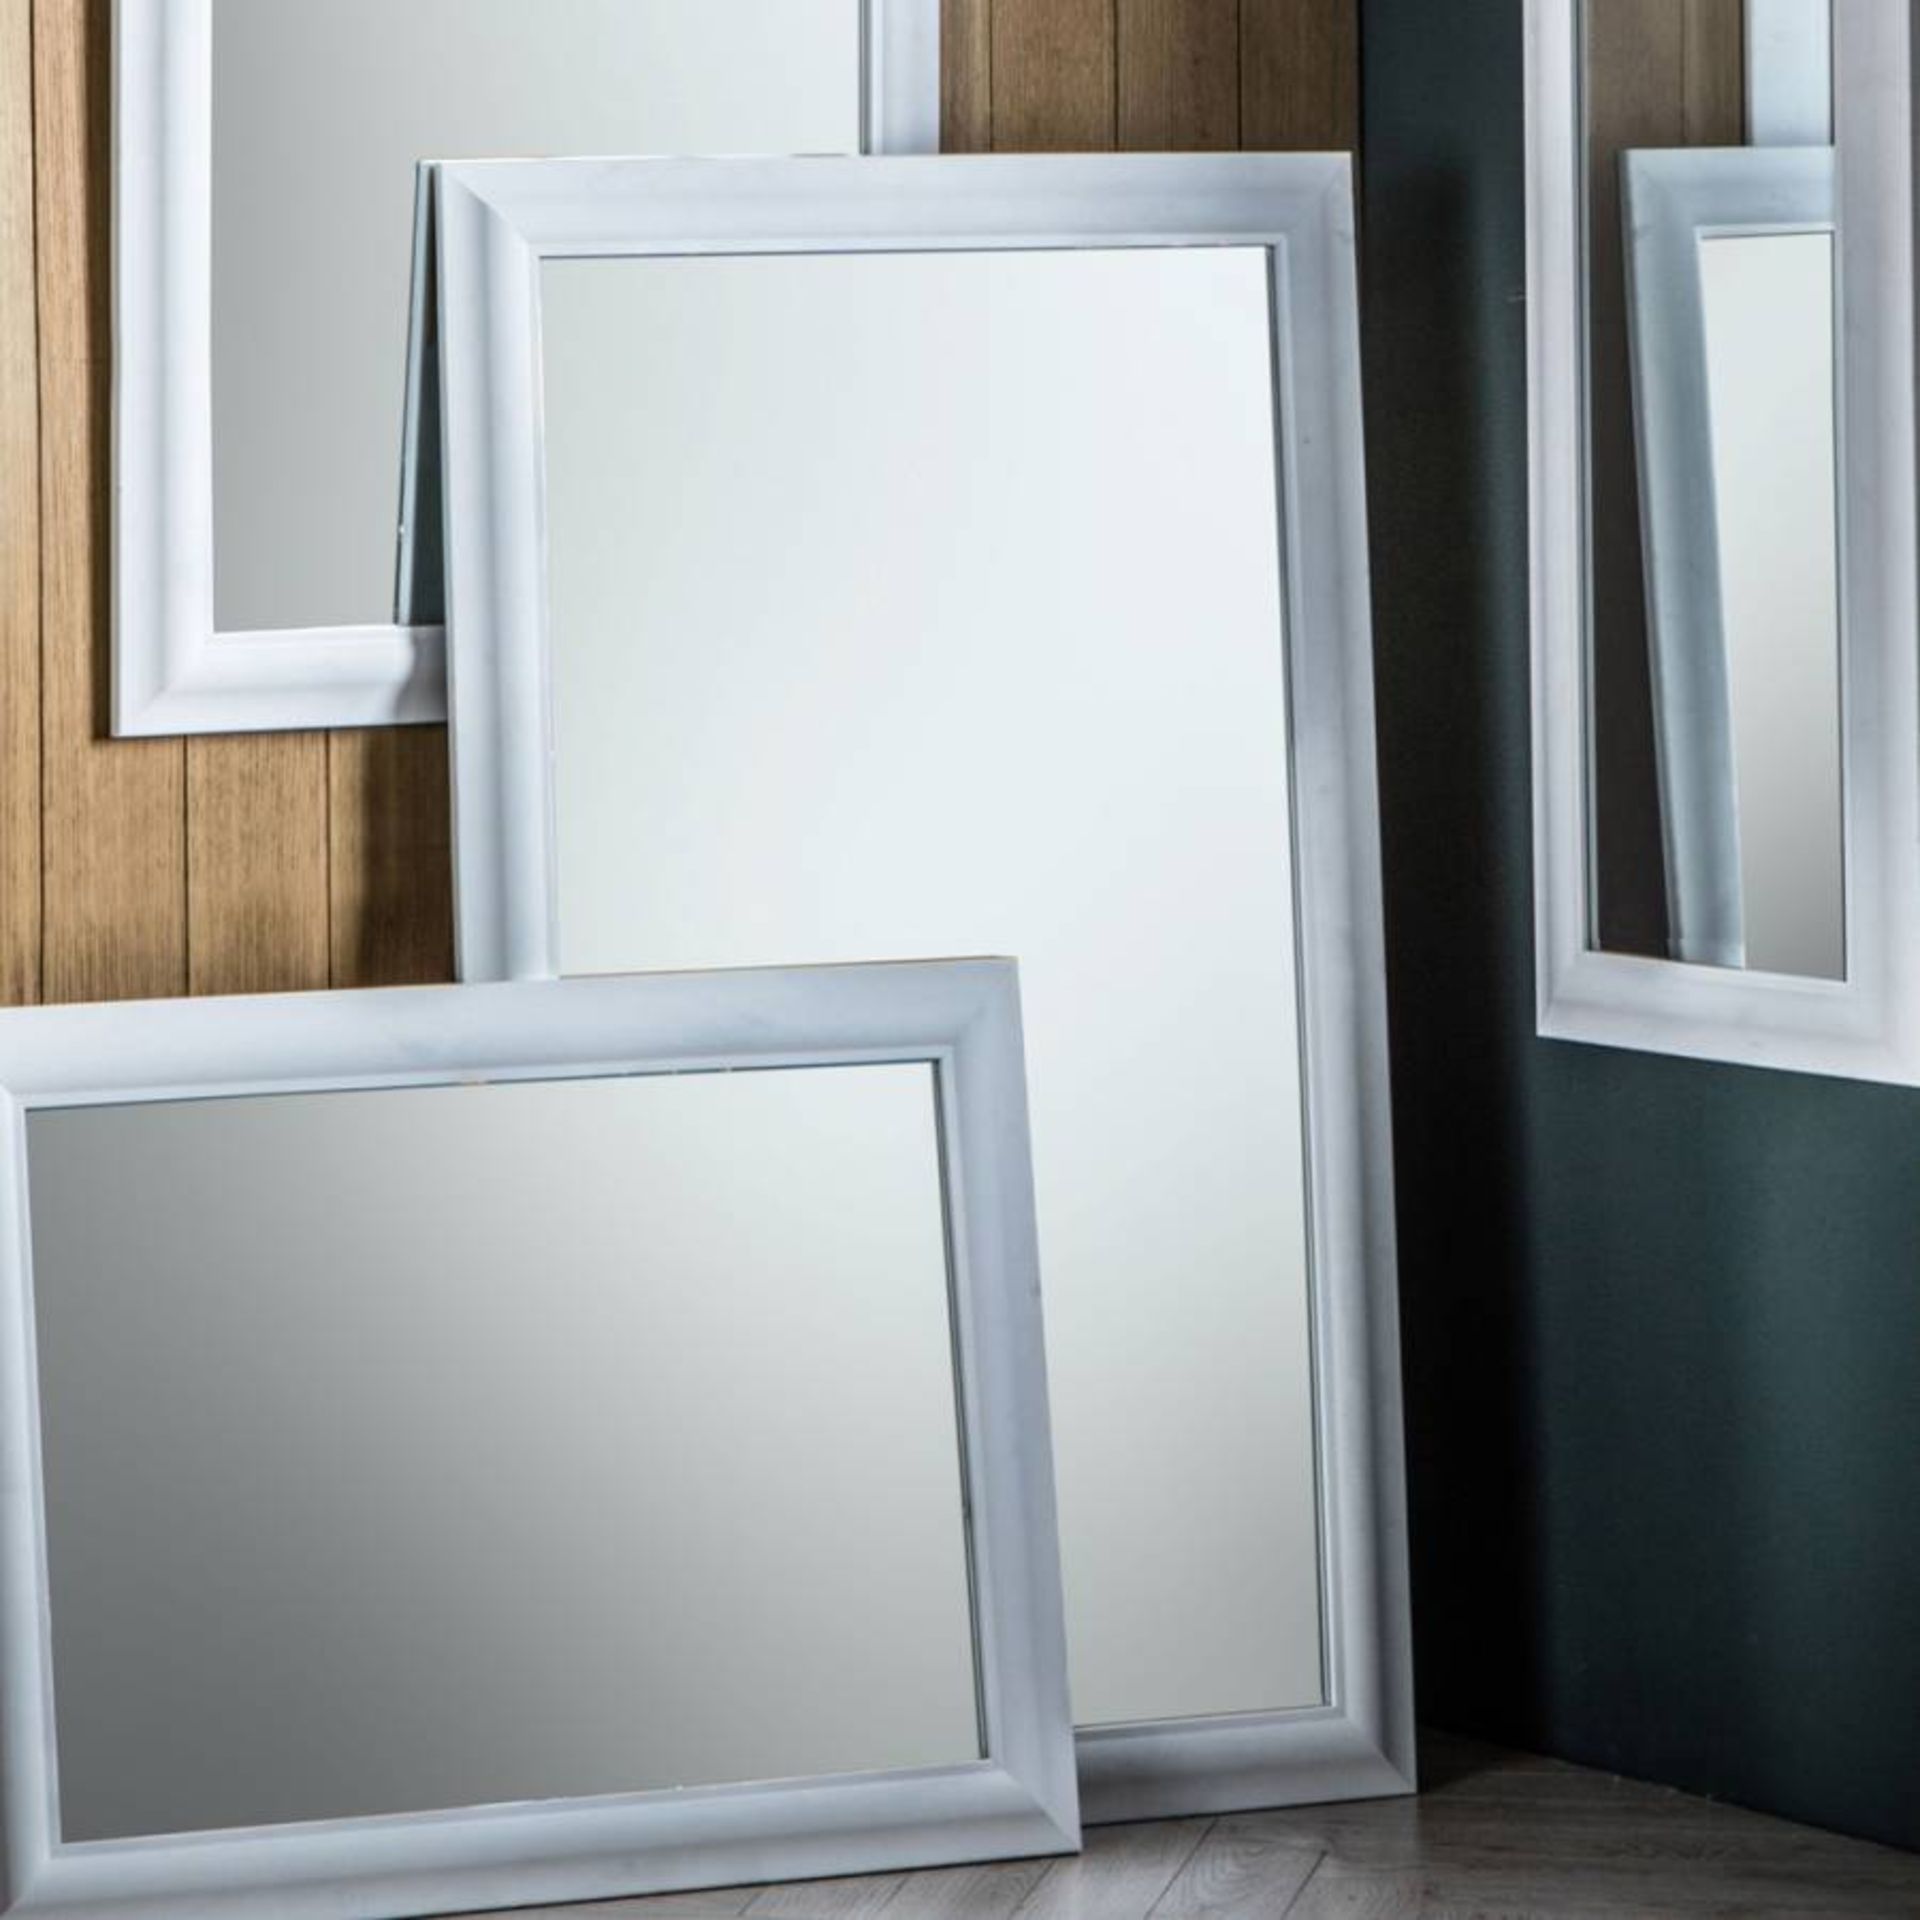 Cobain Mirror White This Cobain Mirror In White Oozes Elegance And Sophistication Hang Above The